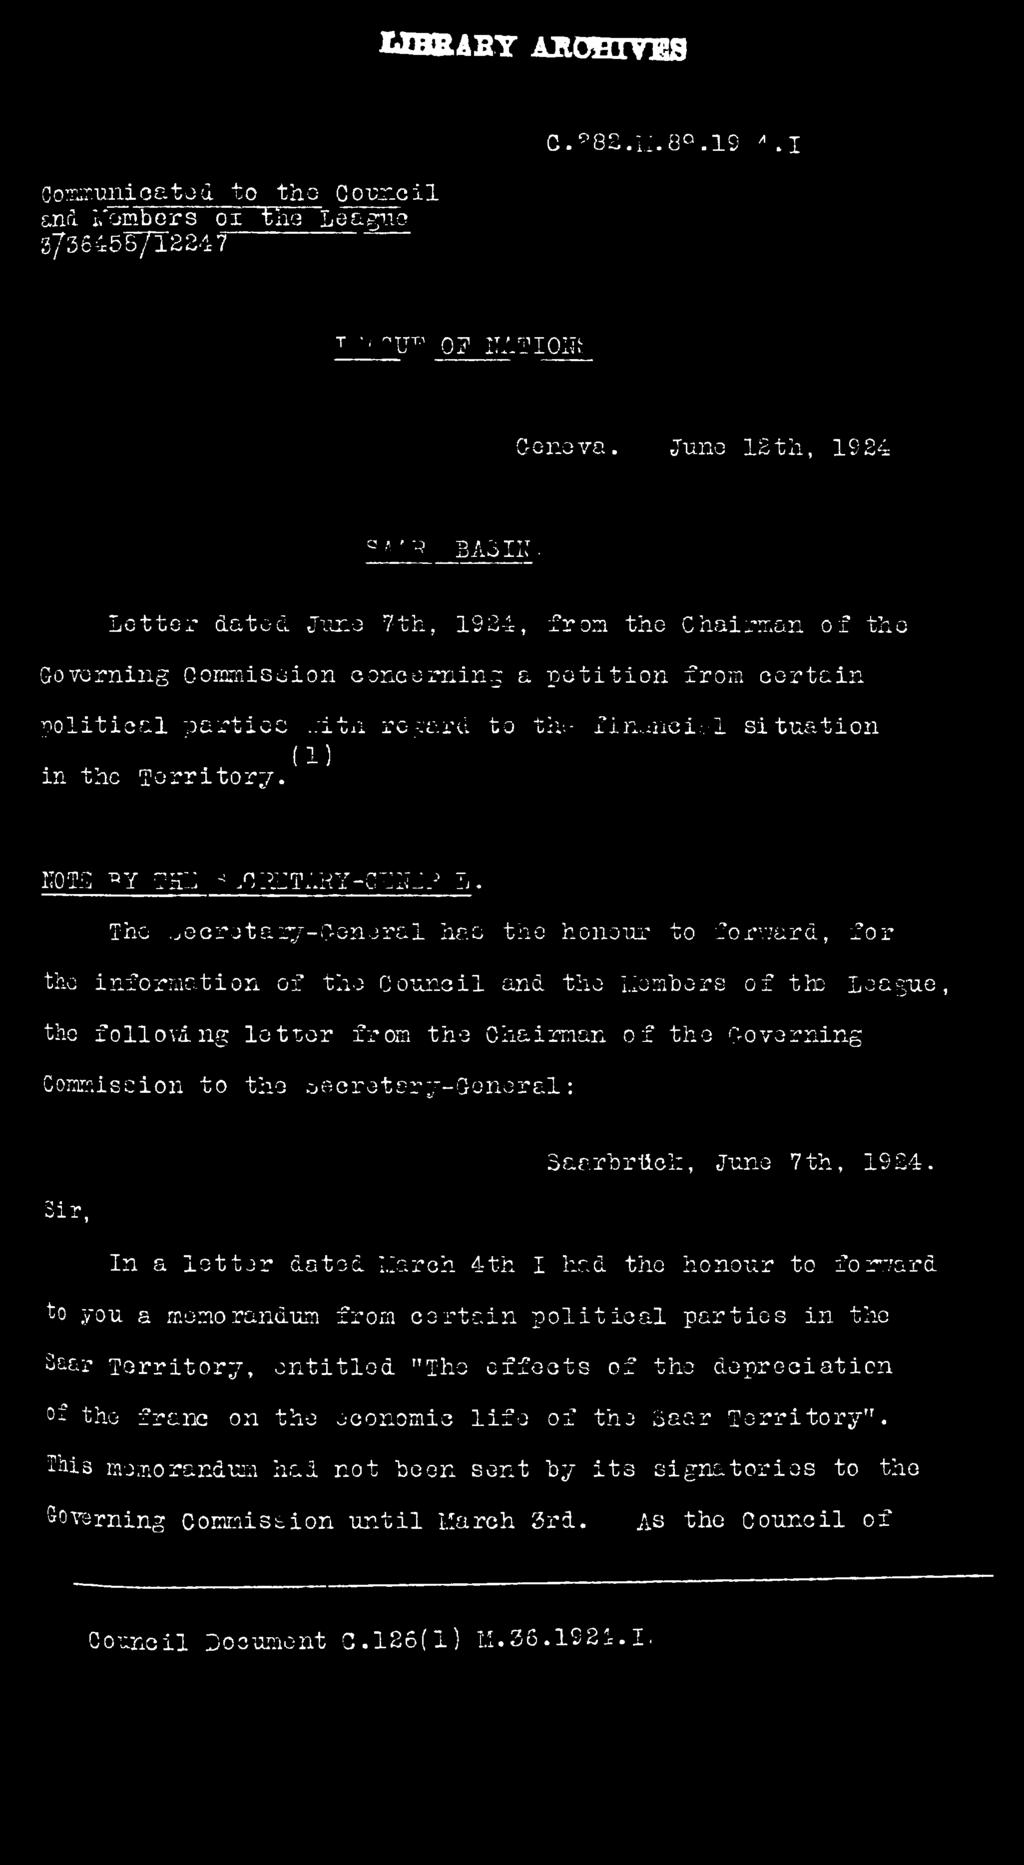 T 5 A X T T T i j - c L O j _ l v L e tte r dated June 7th, 1924, from the Chairman o f the Governing Commission concerning a p e t i t i o n from c e r ta in p o litic a l p a r tie s,:ita reg ard